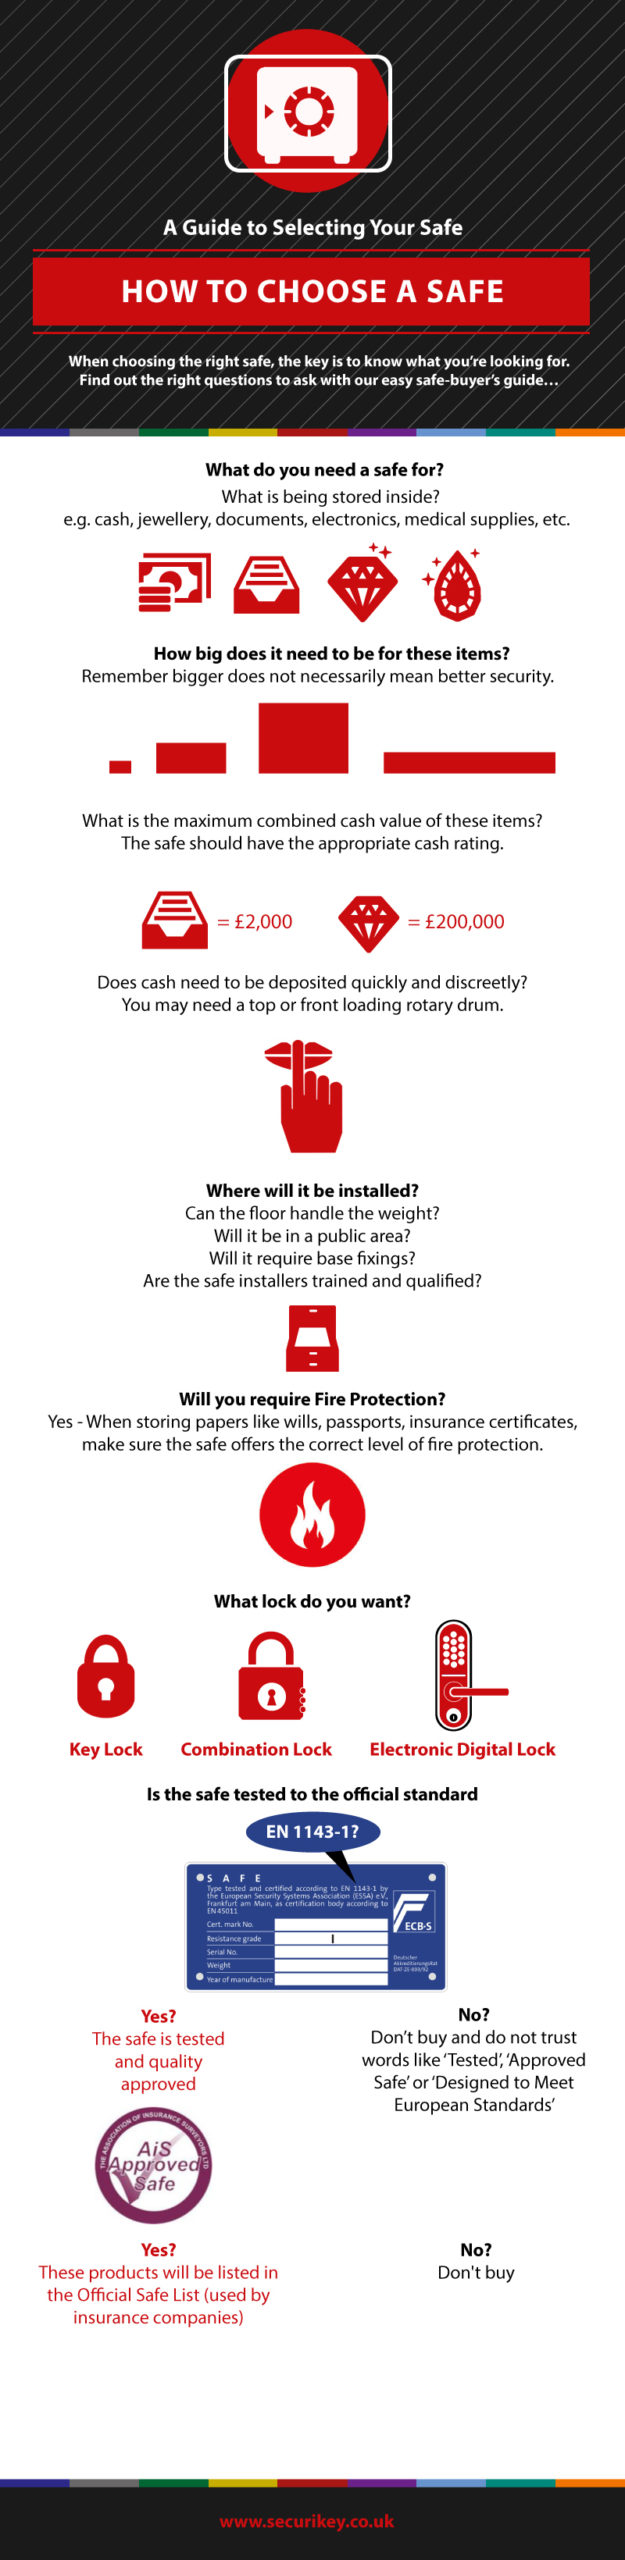 How to choose a safe infographic